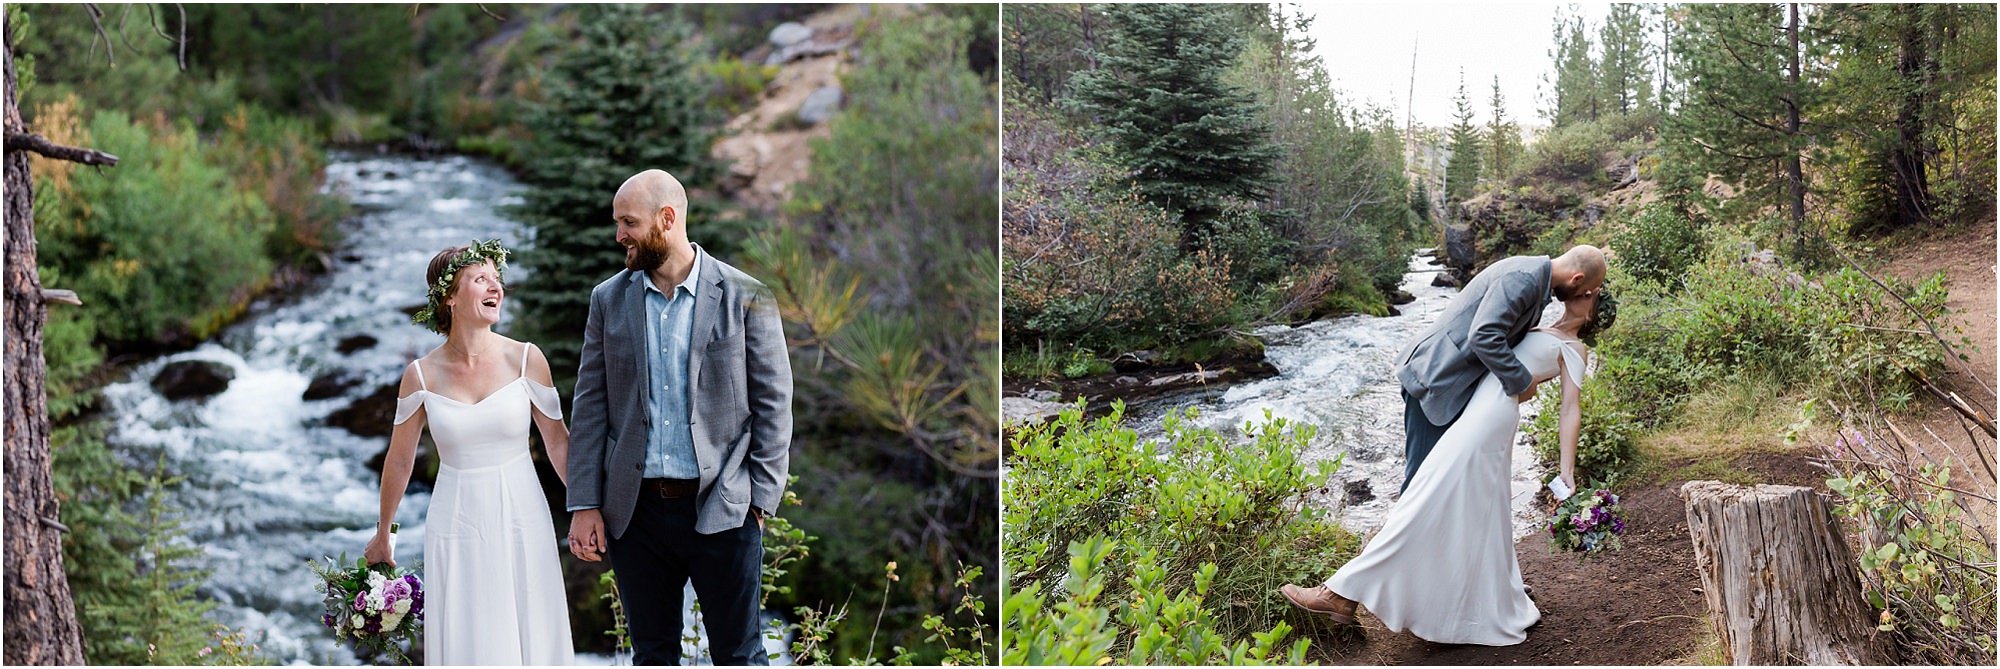 The groom goes for a classic dip with his bride, her hiking boots peeping out from under her white Reformation wedding dress. | Bend Oregon elopement photographer Erica Swantek Photography